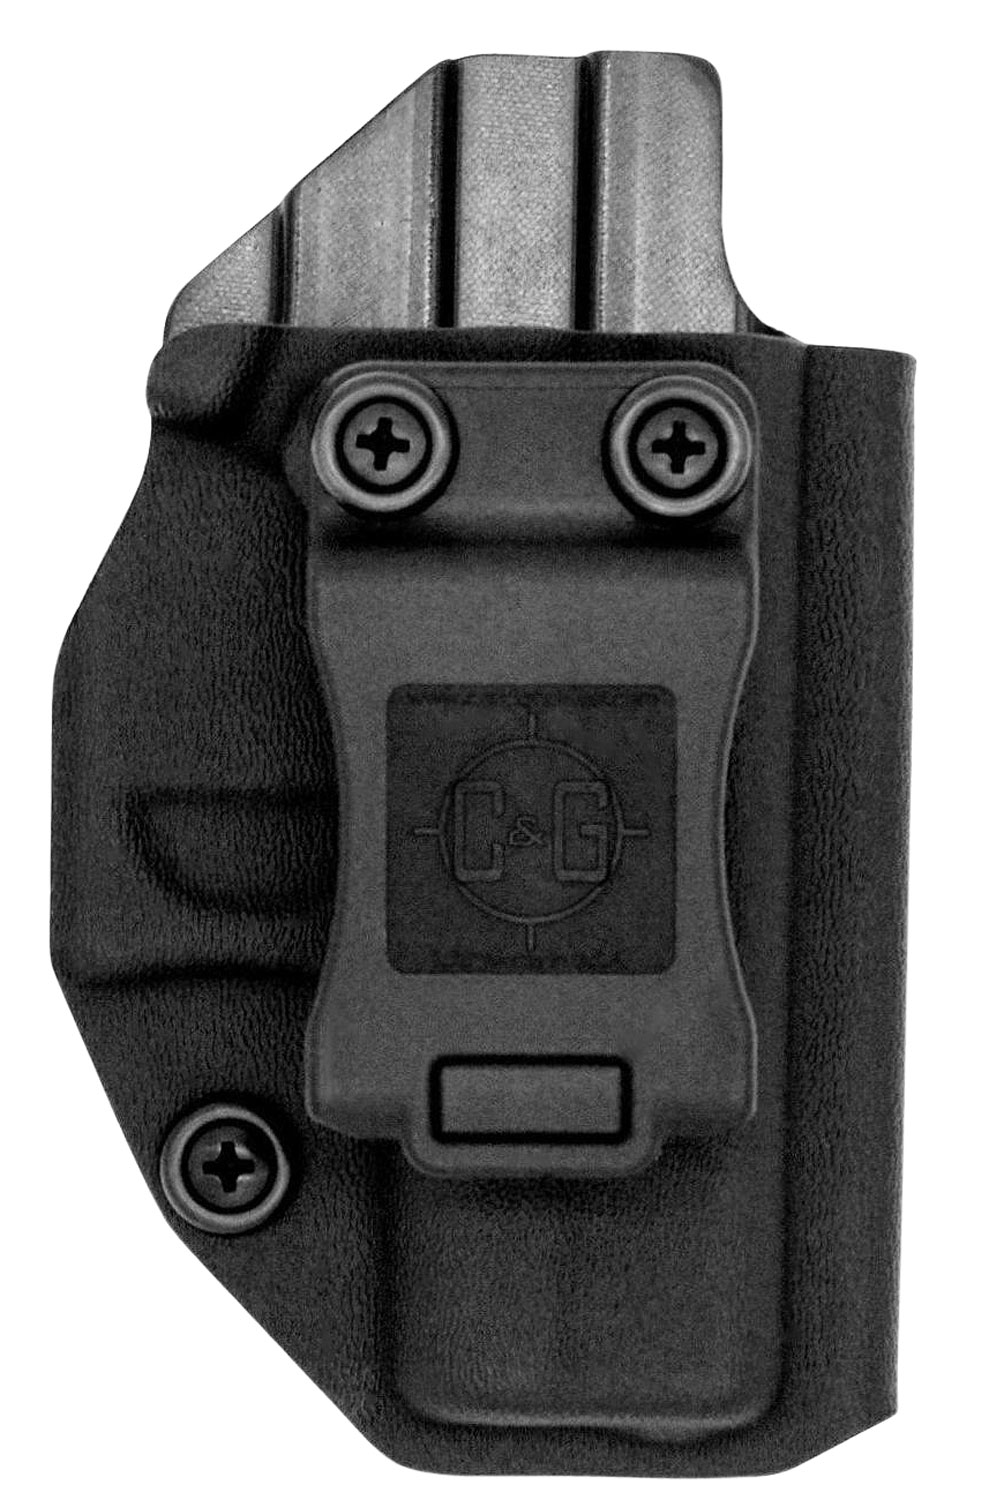 C&G HOLSTERS 040100 Covert IWB Compatible with Glock G19/G23 Kydex Black